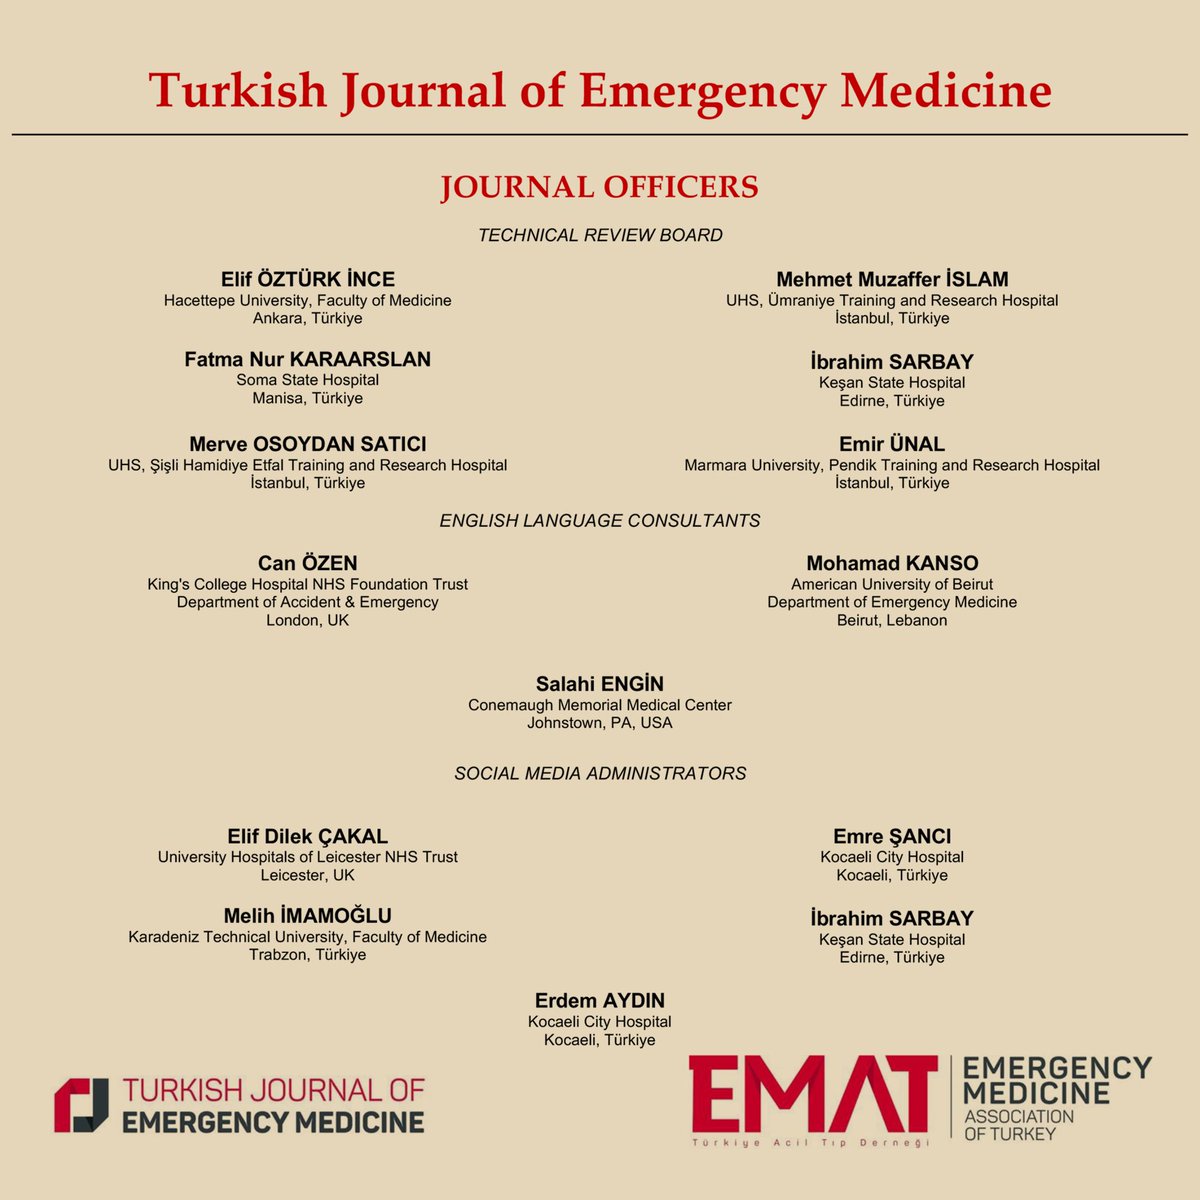 New Year with New Editors 🥳 We are pleased to announce our new editor in chiefs @DrOzgurDogan and @erkangoksu74 and new editorial board. We thank to all our former editors and wish a happy new year to all emergency medicine enthusiasts. @TrTATD #FOAMed #MedEd